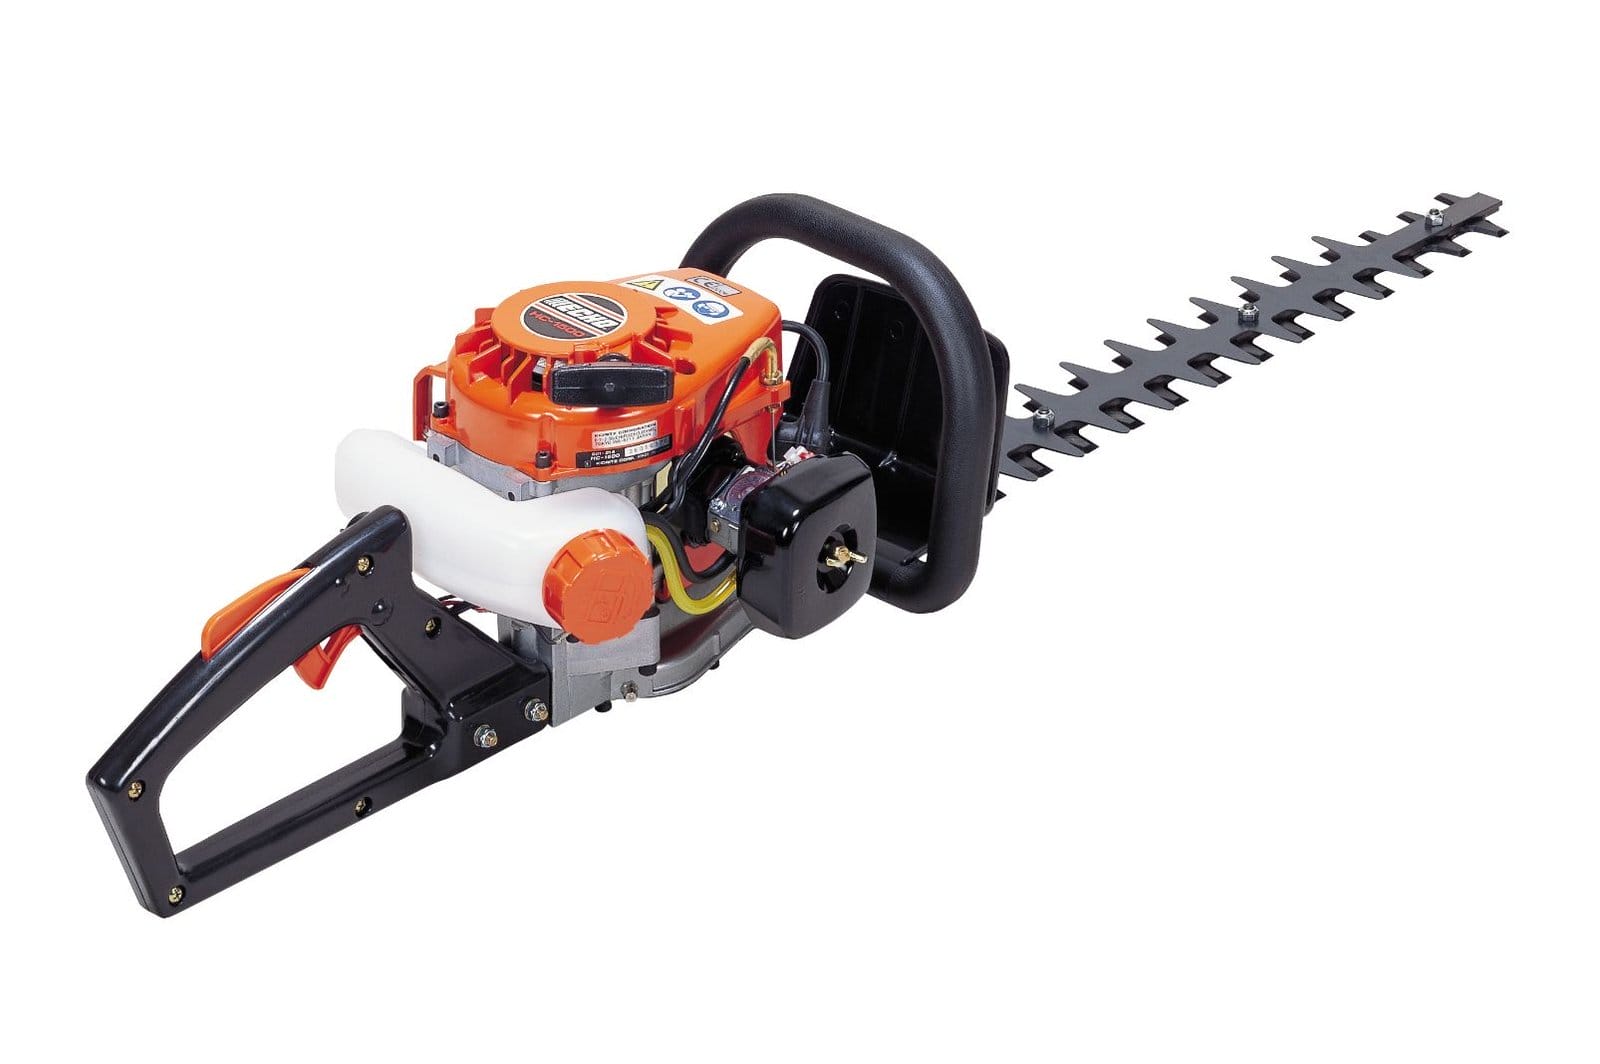 gas hedge trimmer on pole